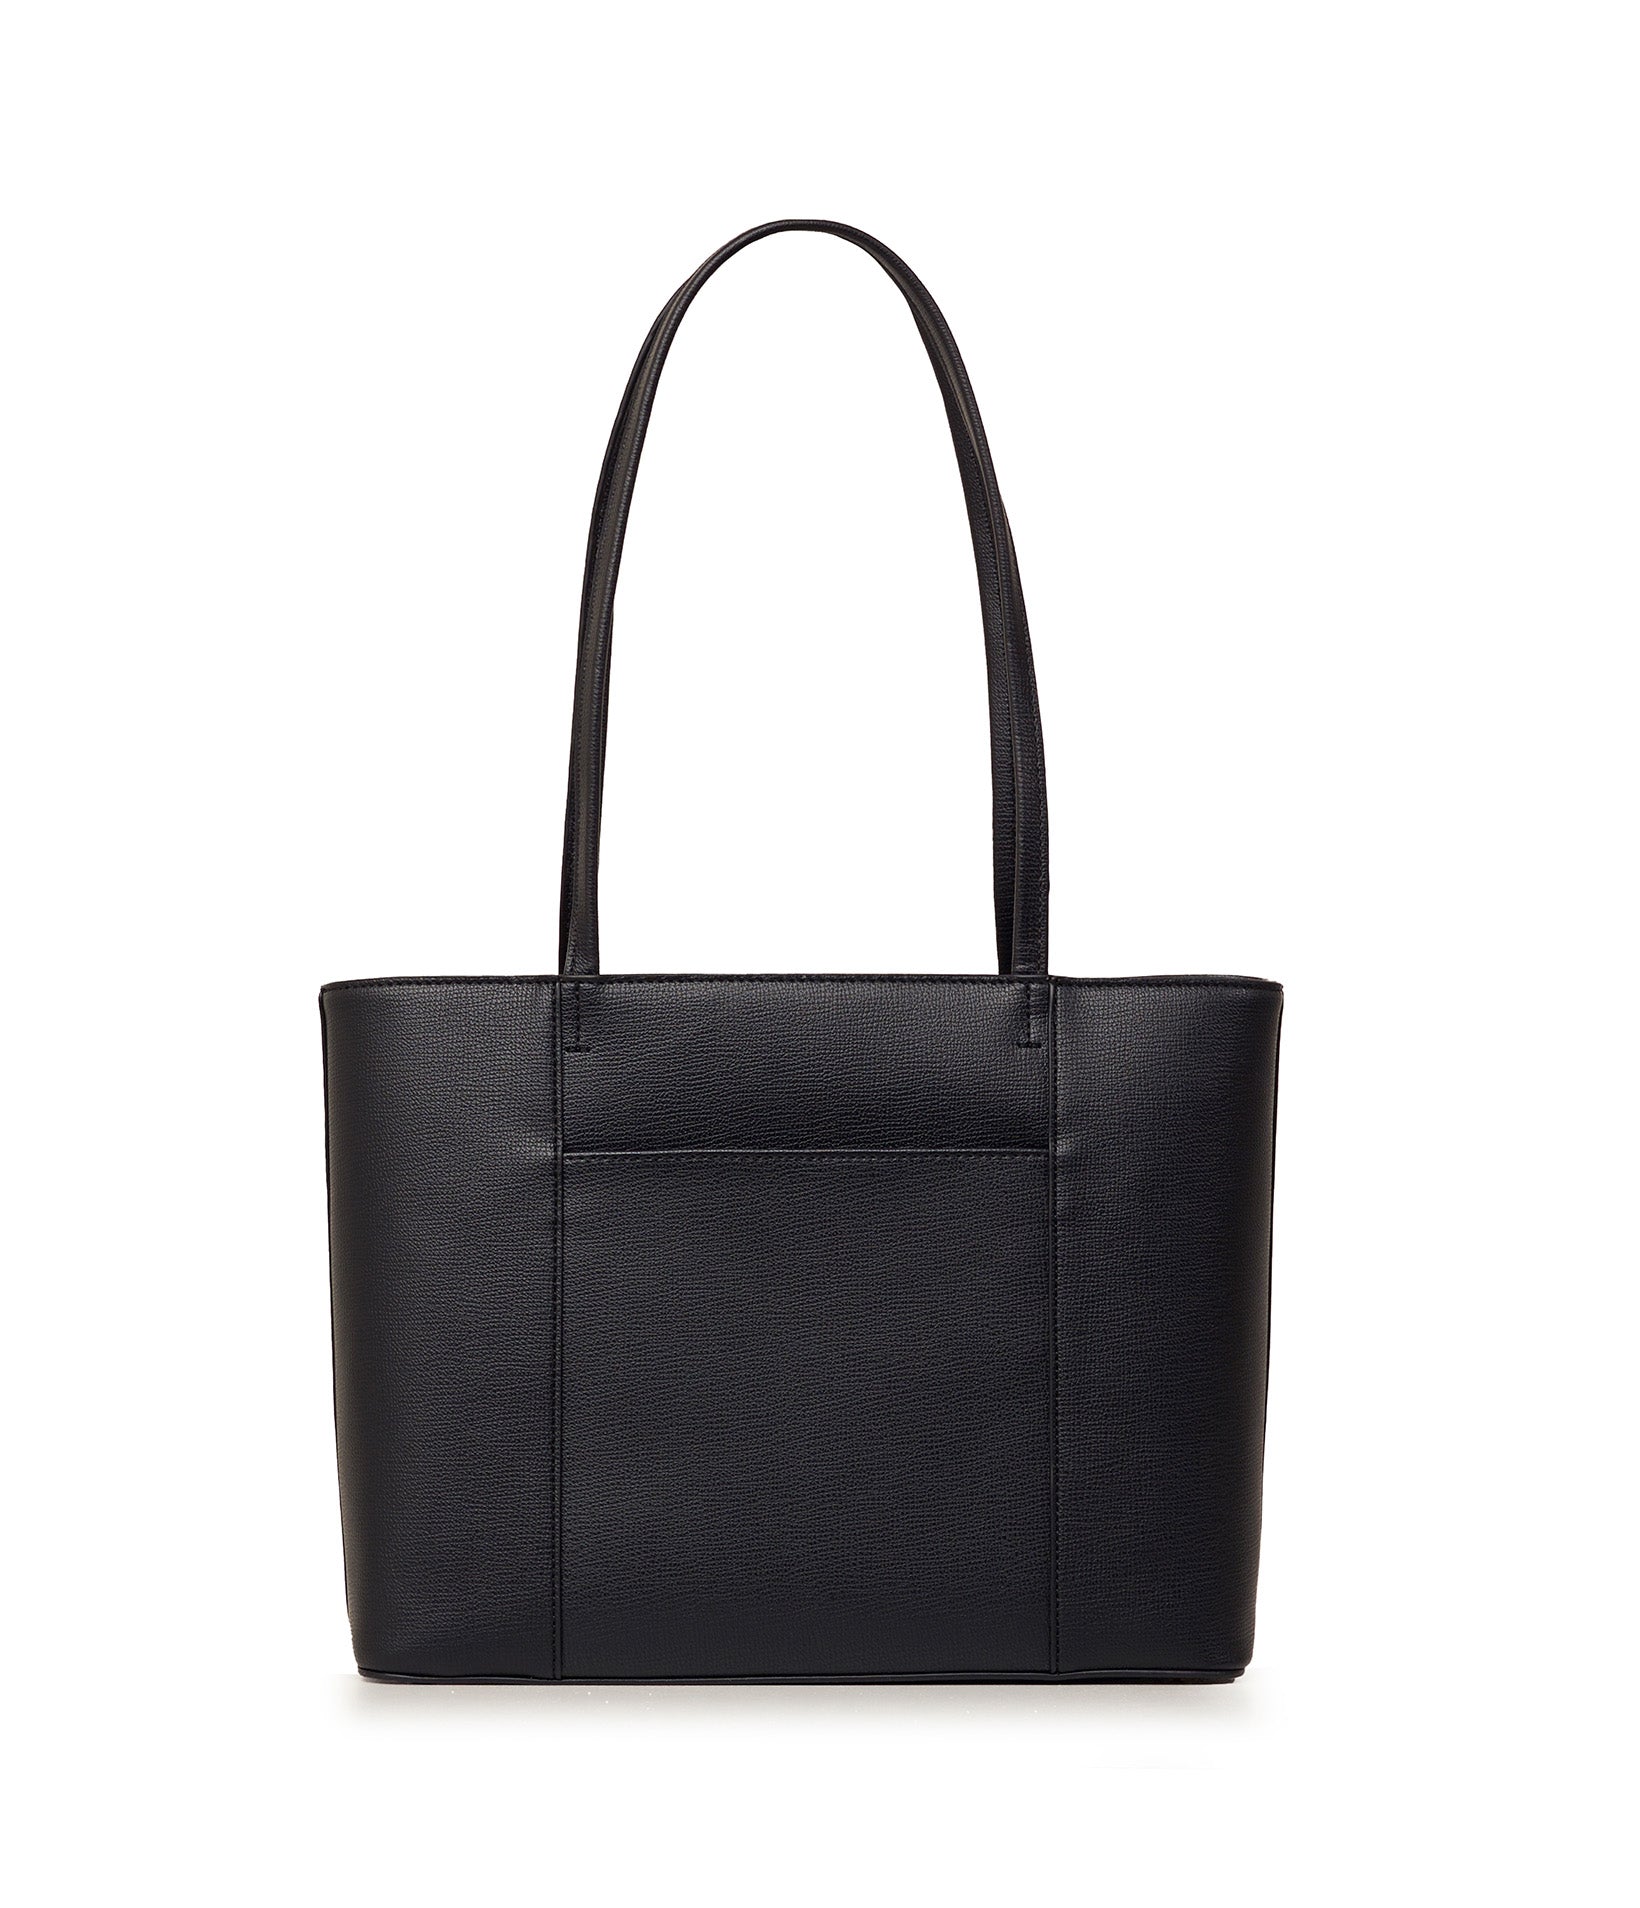 MAYBELLE ZIPPER TOTE